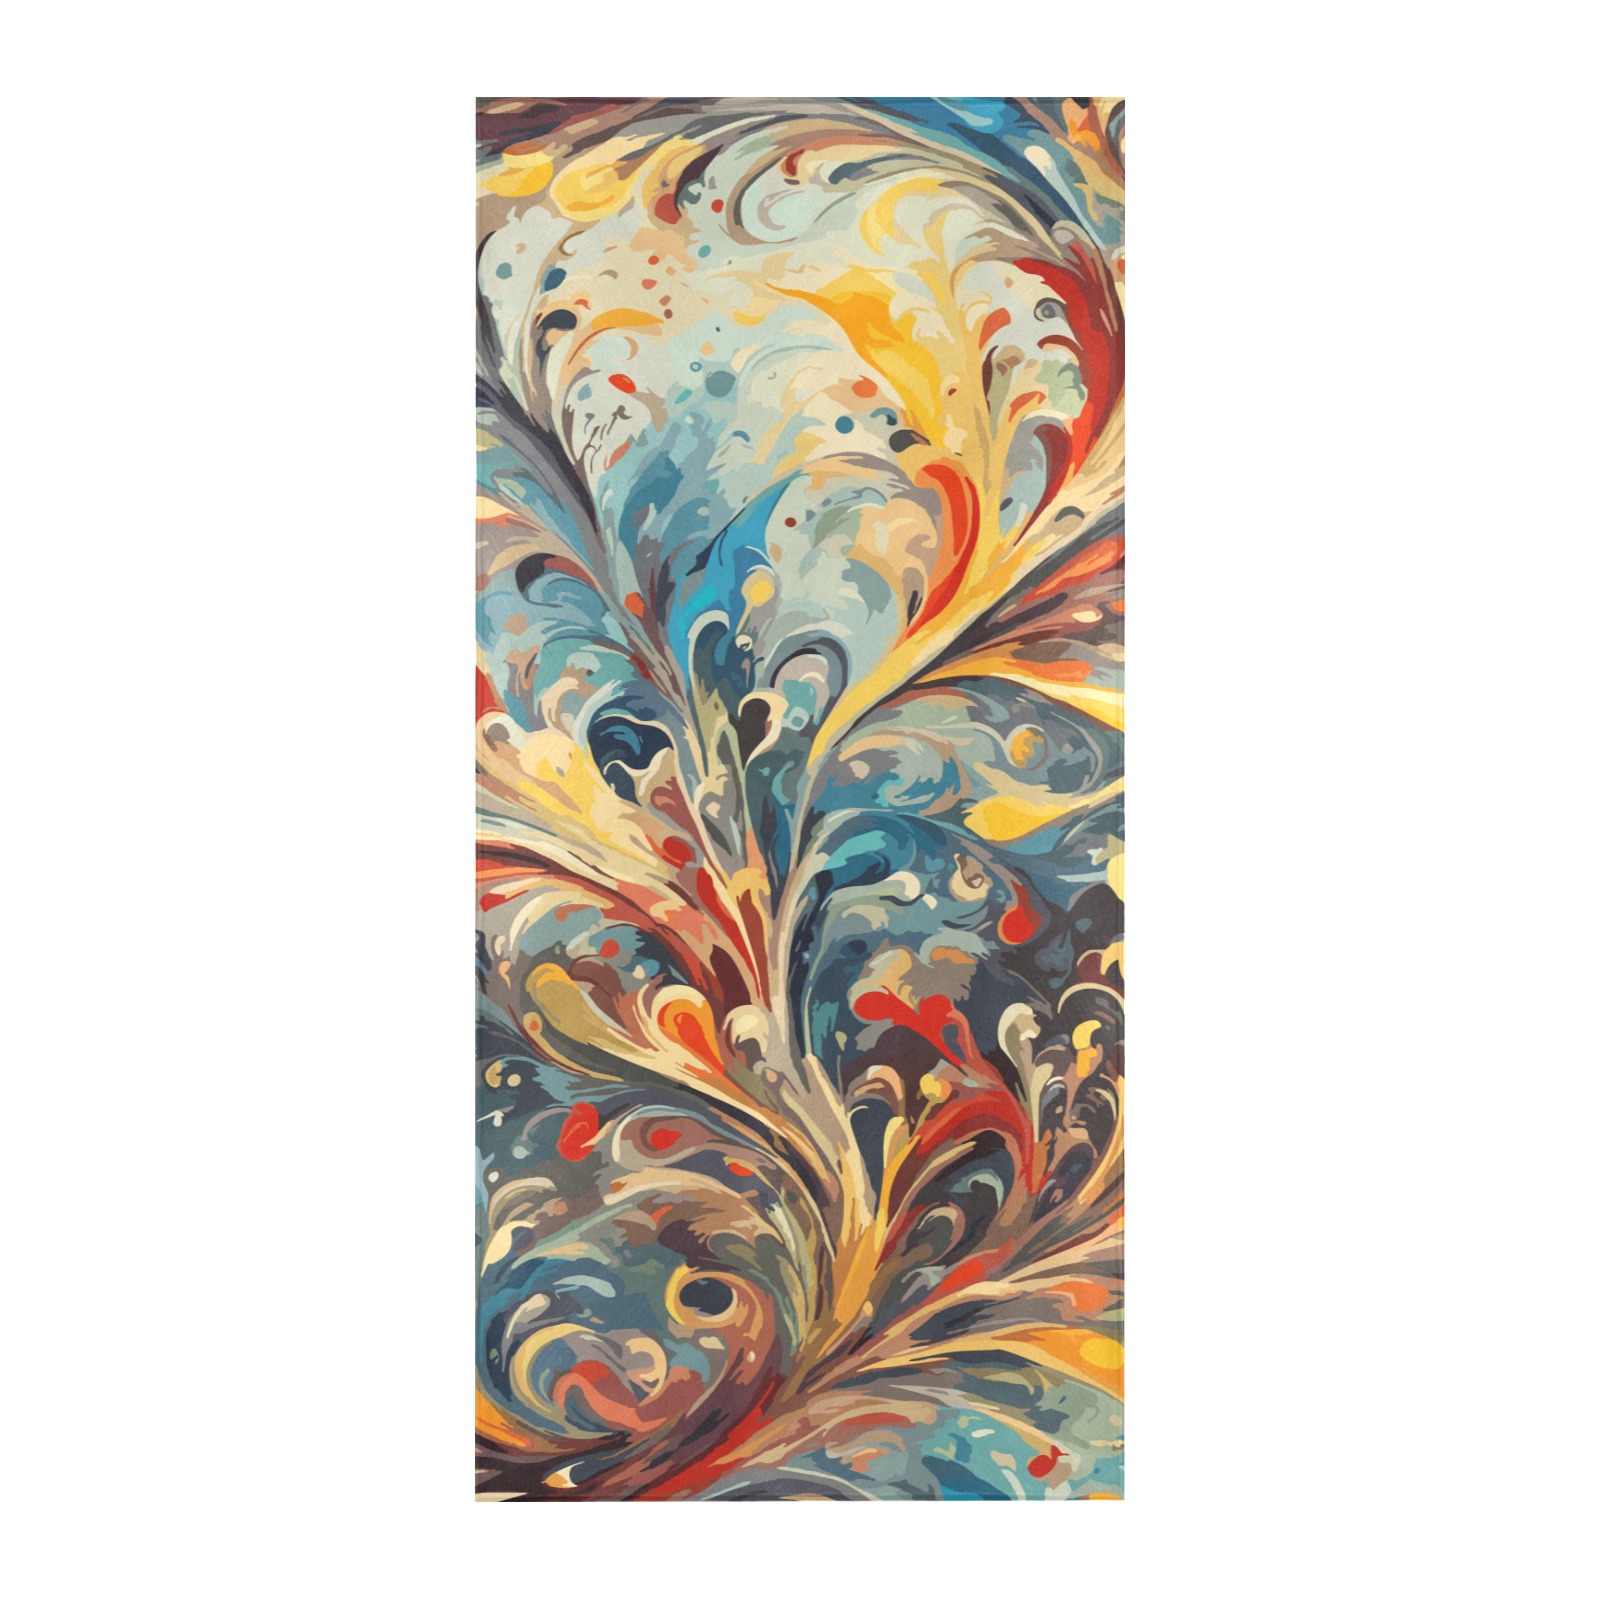 Stunning abstract floral ornament. Colorful art. Beach Towel 32"x 71"